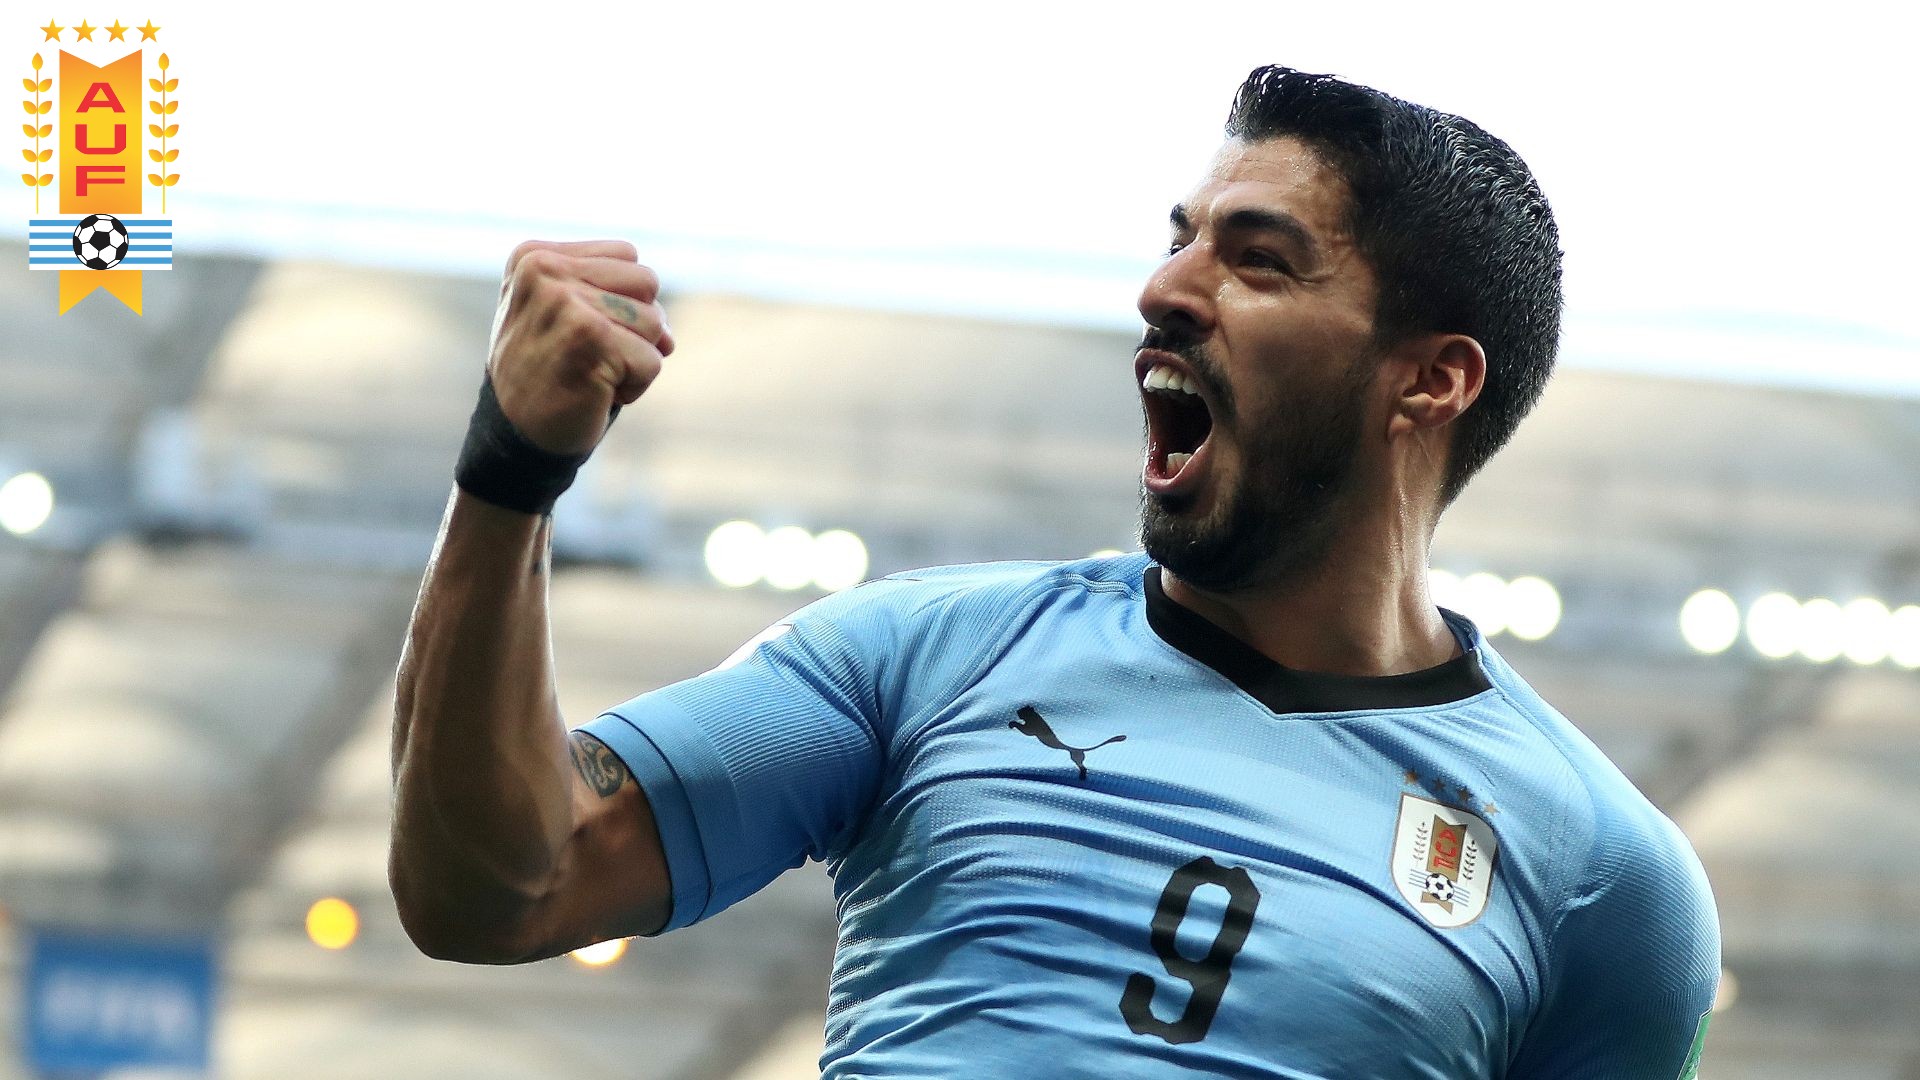 Luis Suarez Uruguay Wallpaper HD With Resolution 1920X1080 pixel. You can make this wallpaper for your Mac or Windows Desktop Background, iPhone, Android or Tablet and another Smartphone device for free